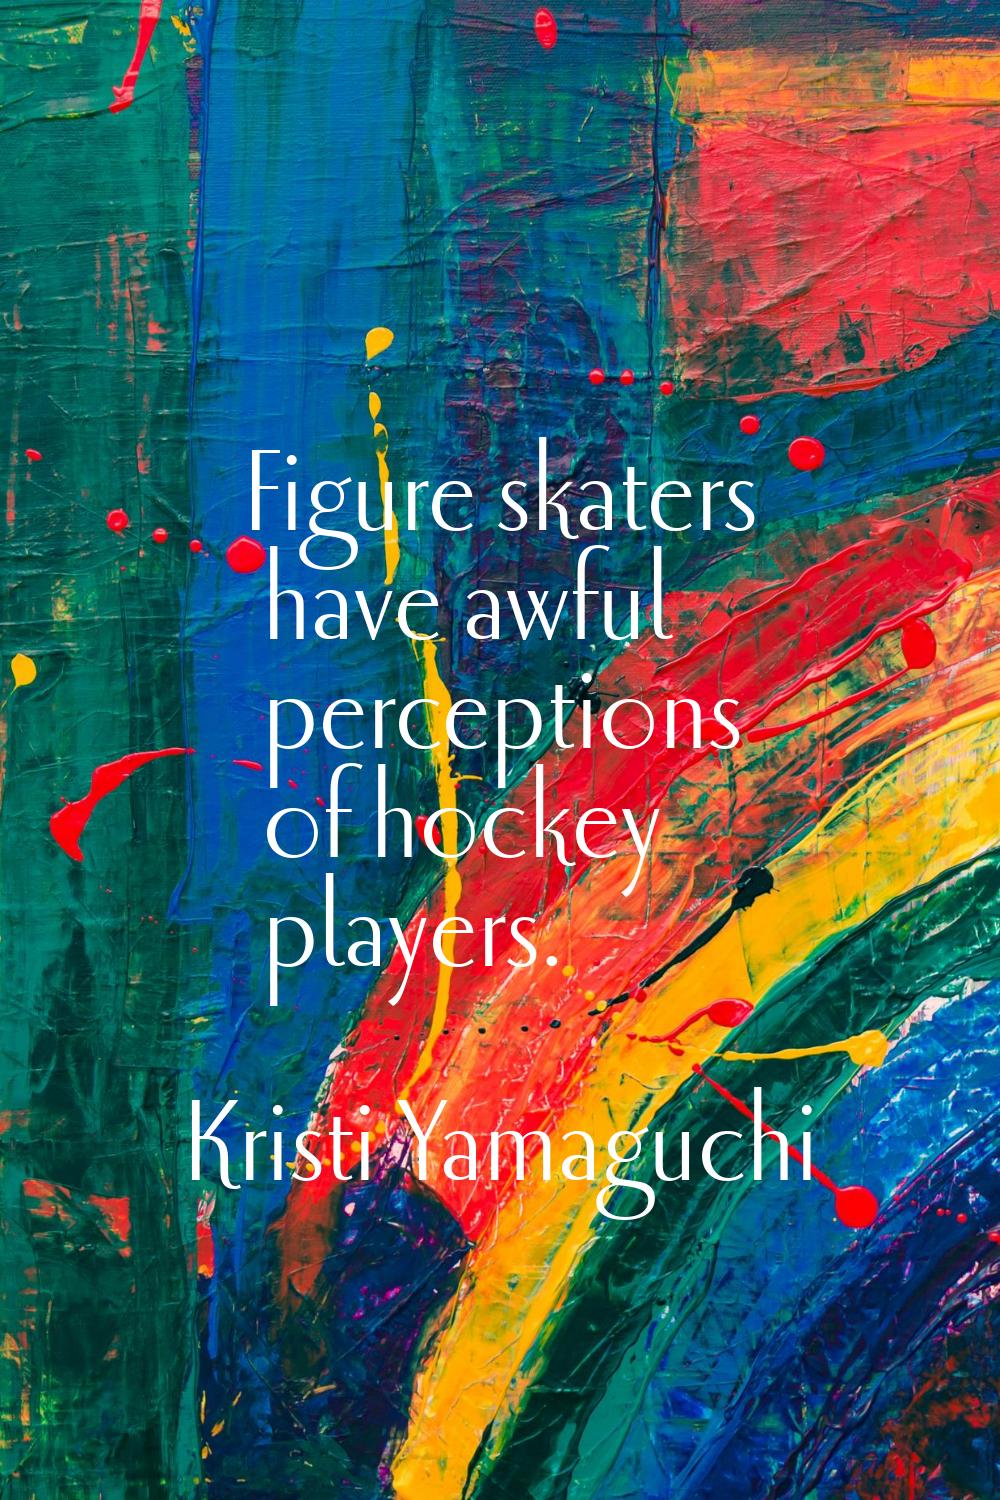 Figure skaters have awful perceptions of hockey players.